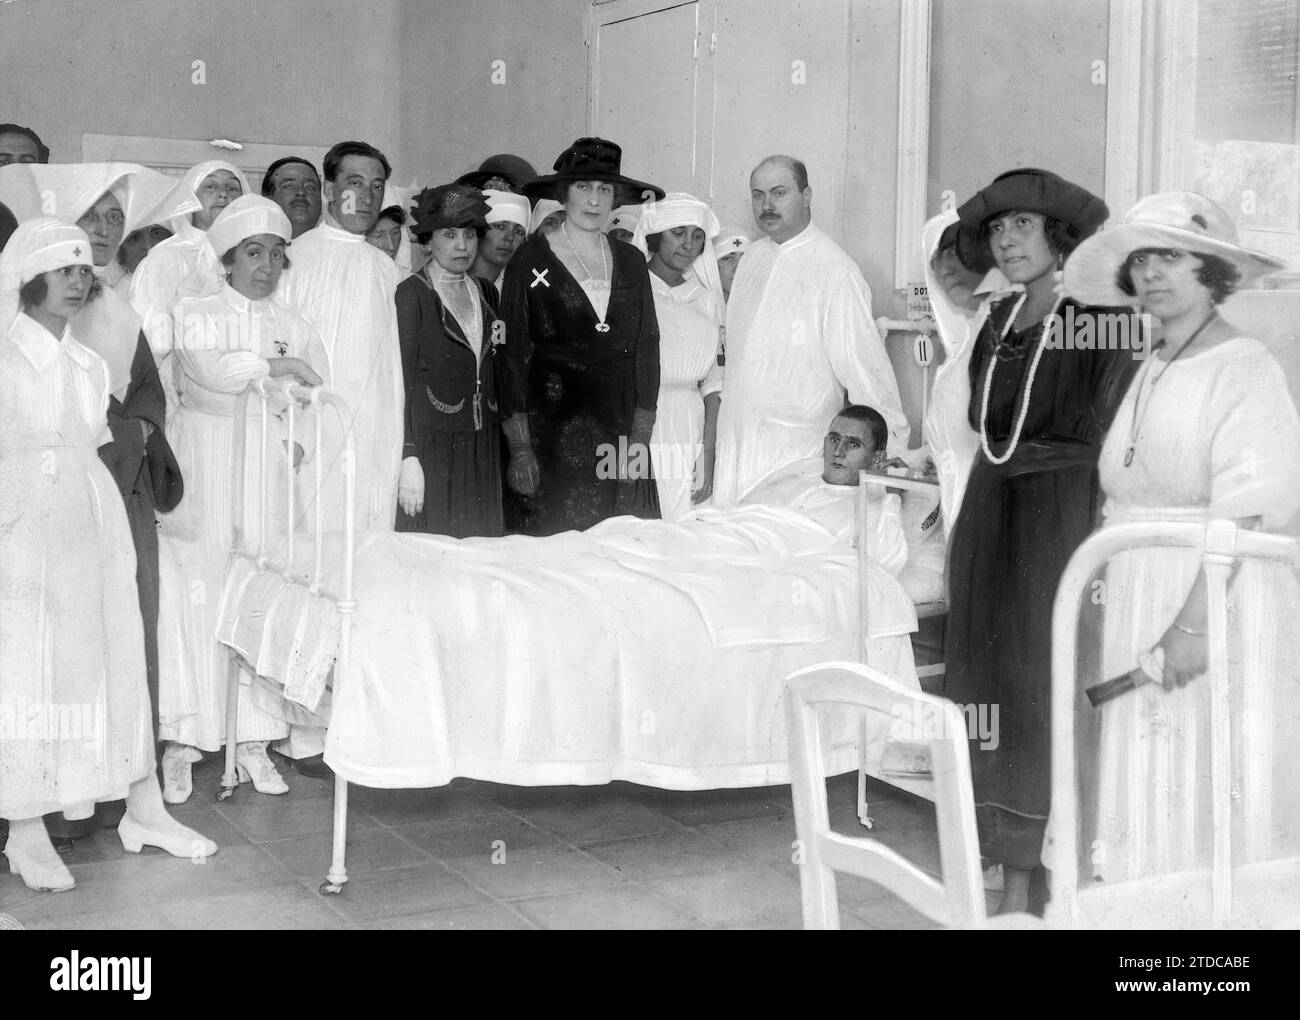 10/04/1921. Madrid. At the Red Cross Hospital Her Majesty Queen Victoria (X) Visiting the Soldiers who Came on the First Hospital Train, Arrived the Day before Last Night. Credit: Album / Archivo ABC / Julio Duque Stock Photo